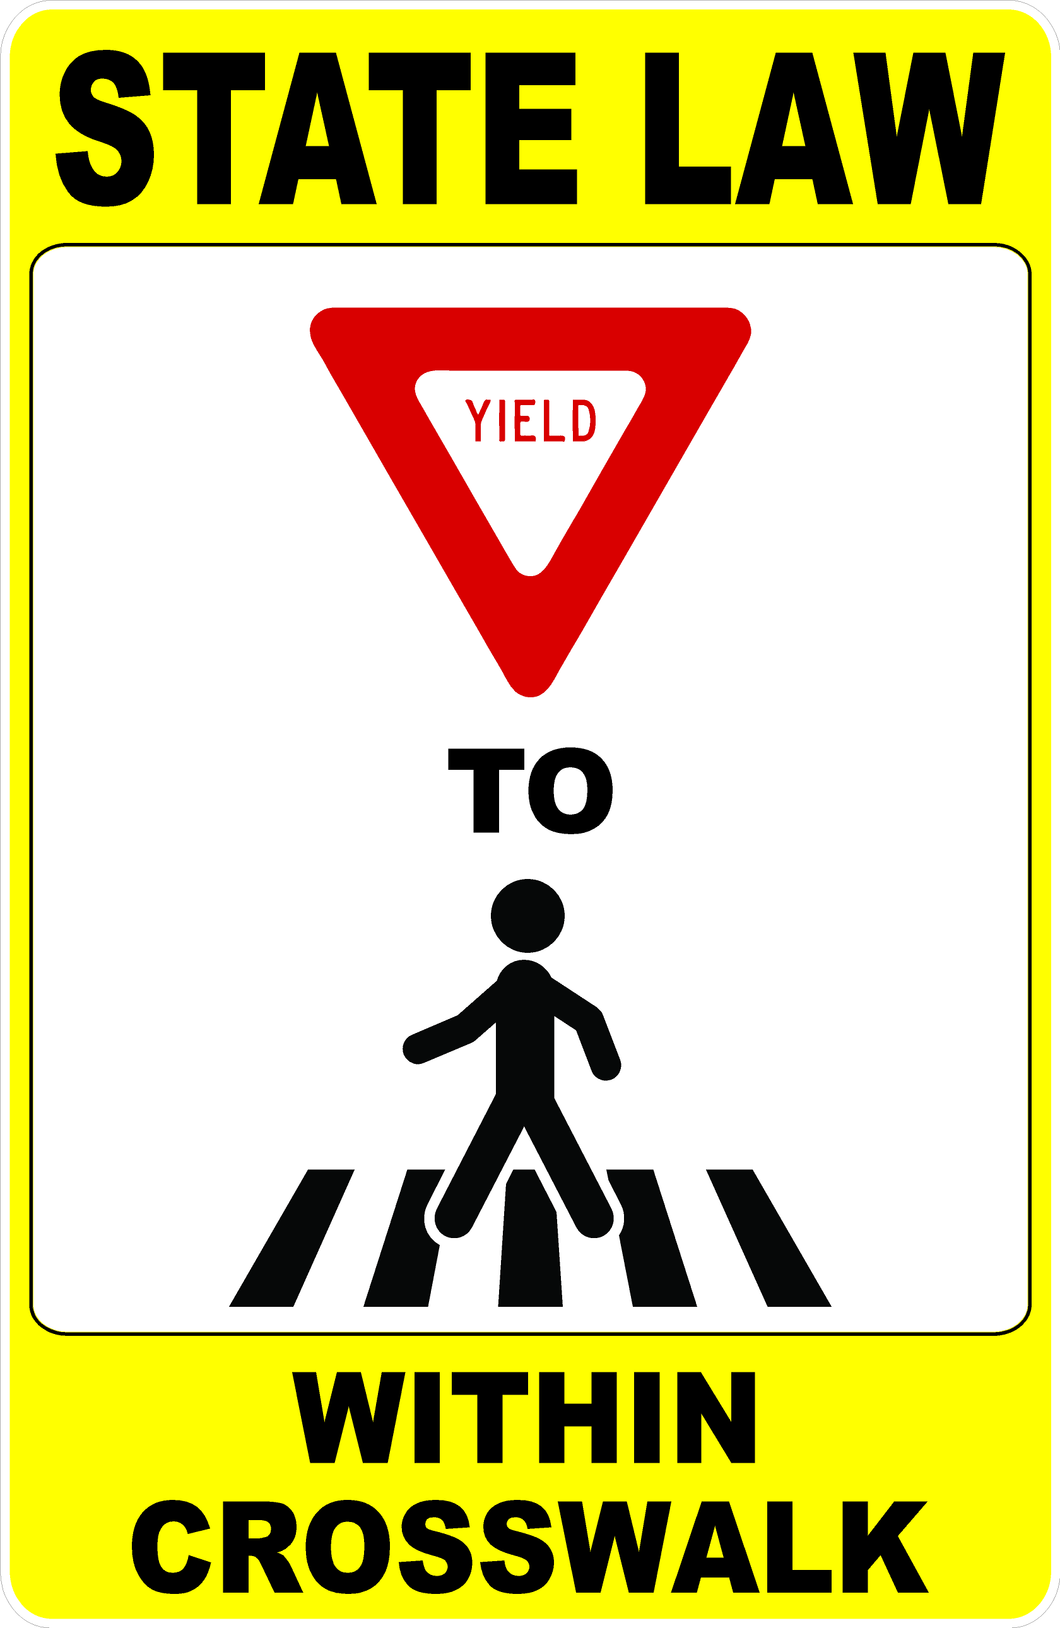 State Law Yield For Pedestrians Within Crosswalk Sign